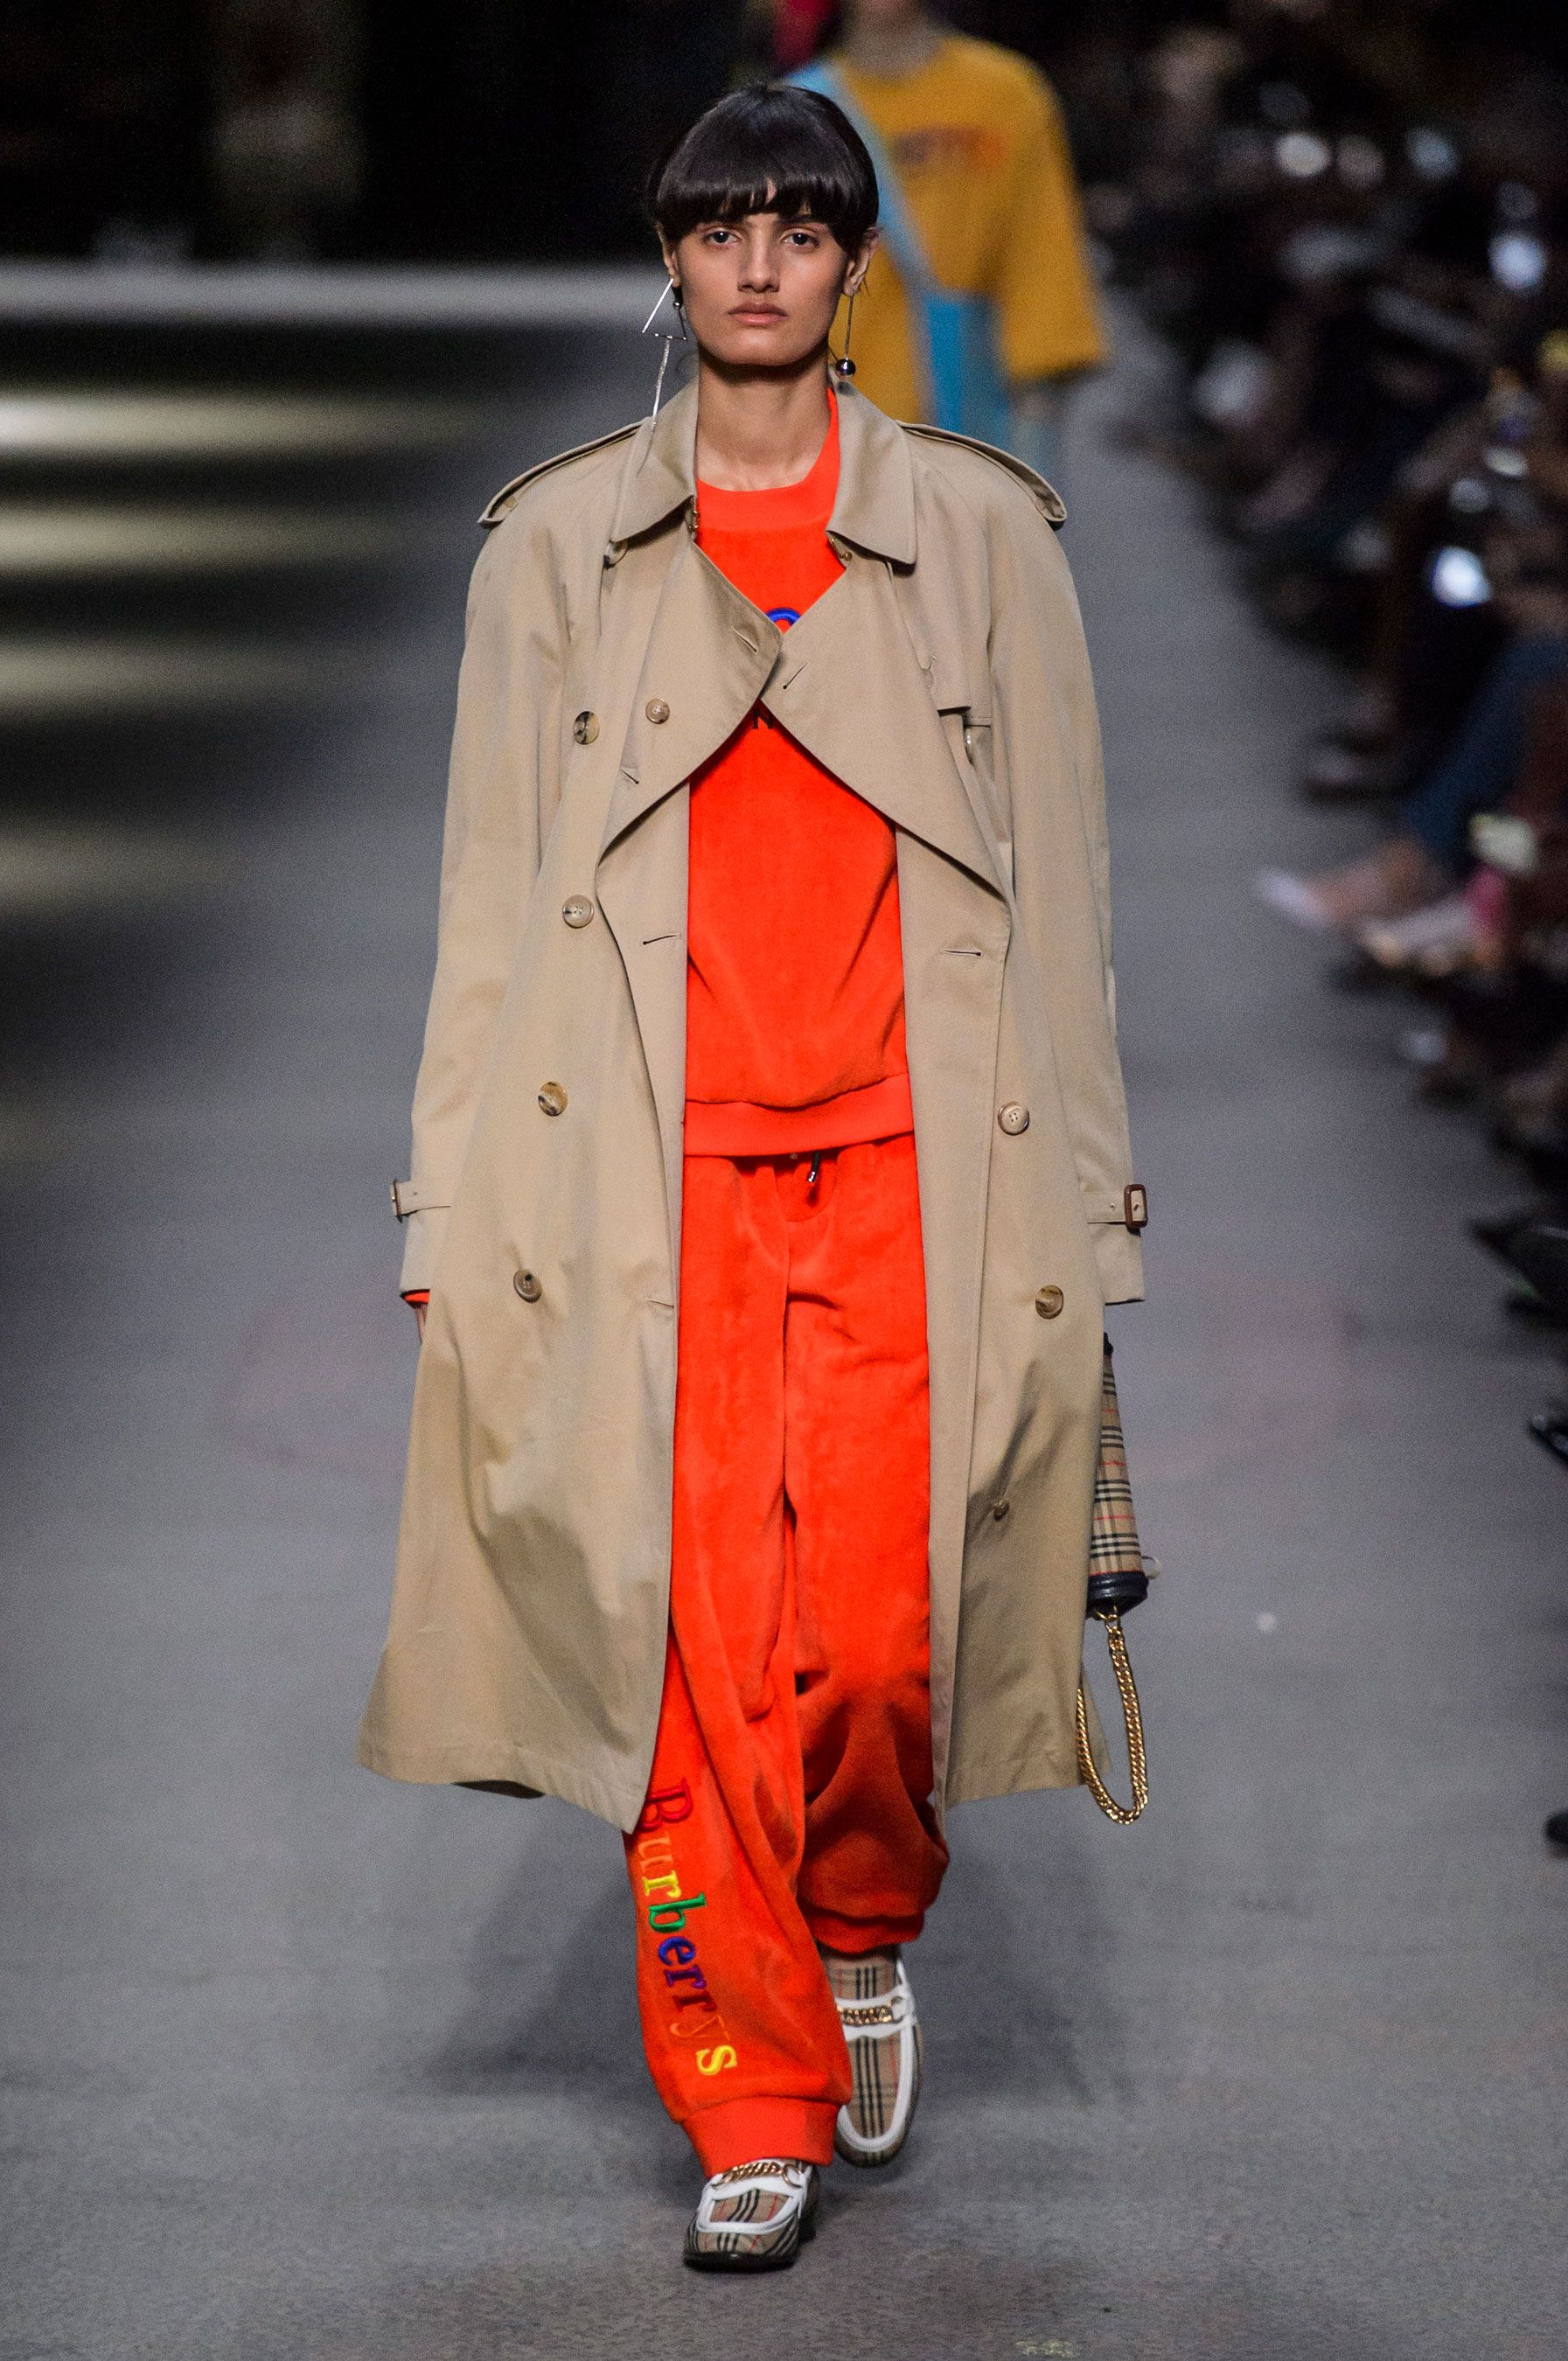 Burberry Trench Coats at Fashion Week Autumn 2018